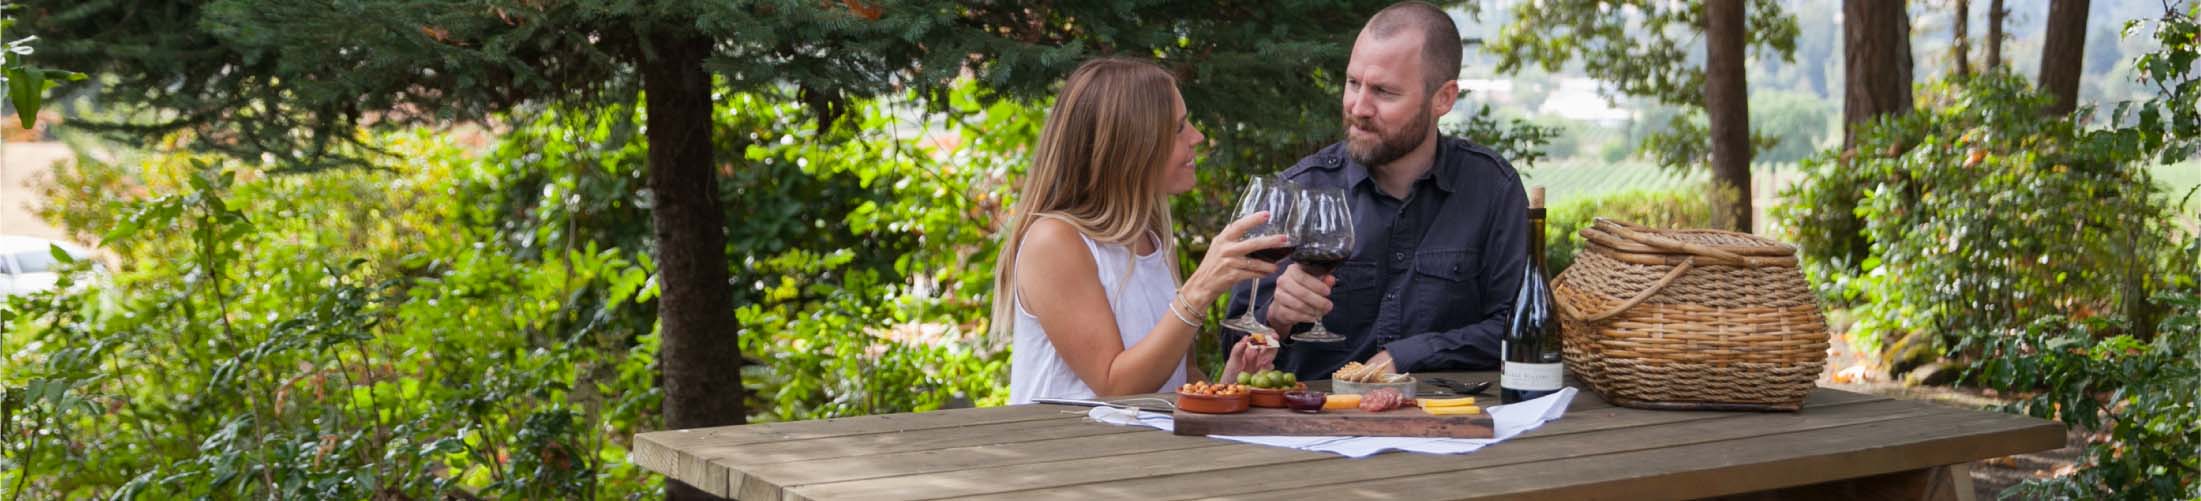 A couple enjoying a picnic with wine in Oregon's Willamette Valley Wine County.